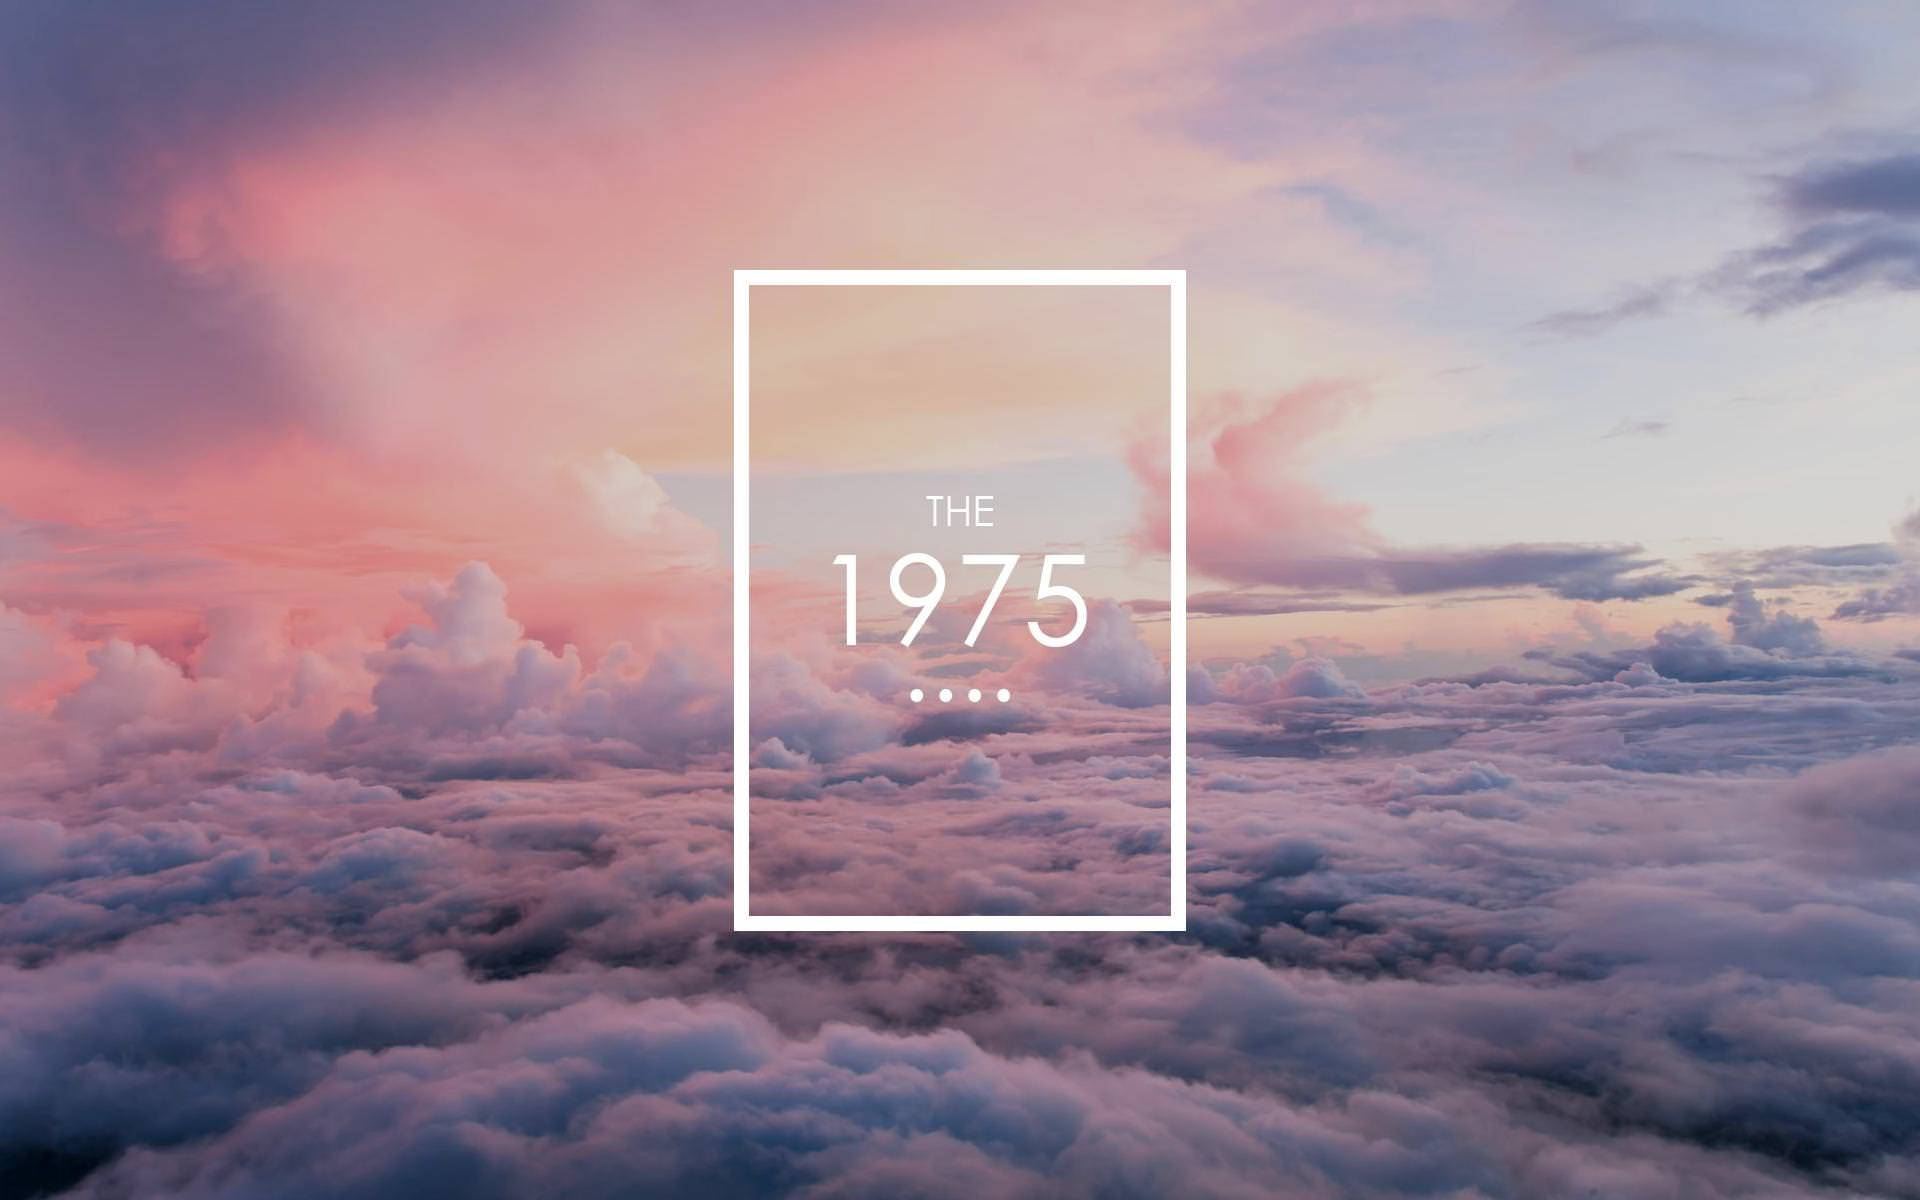 The 1975 Logo In Clouds Wallpaper